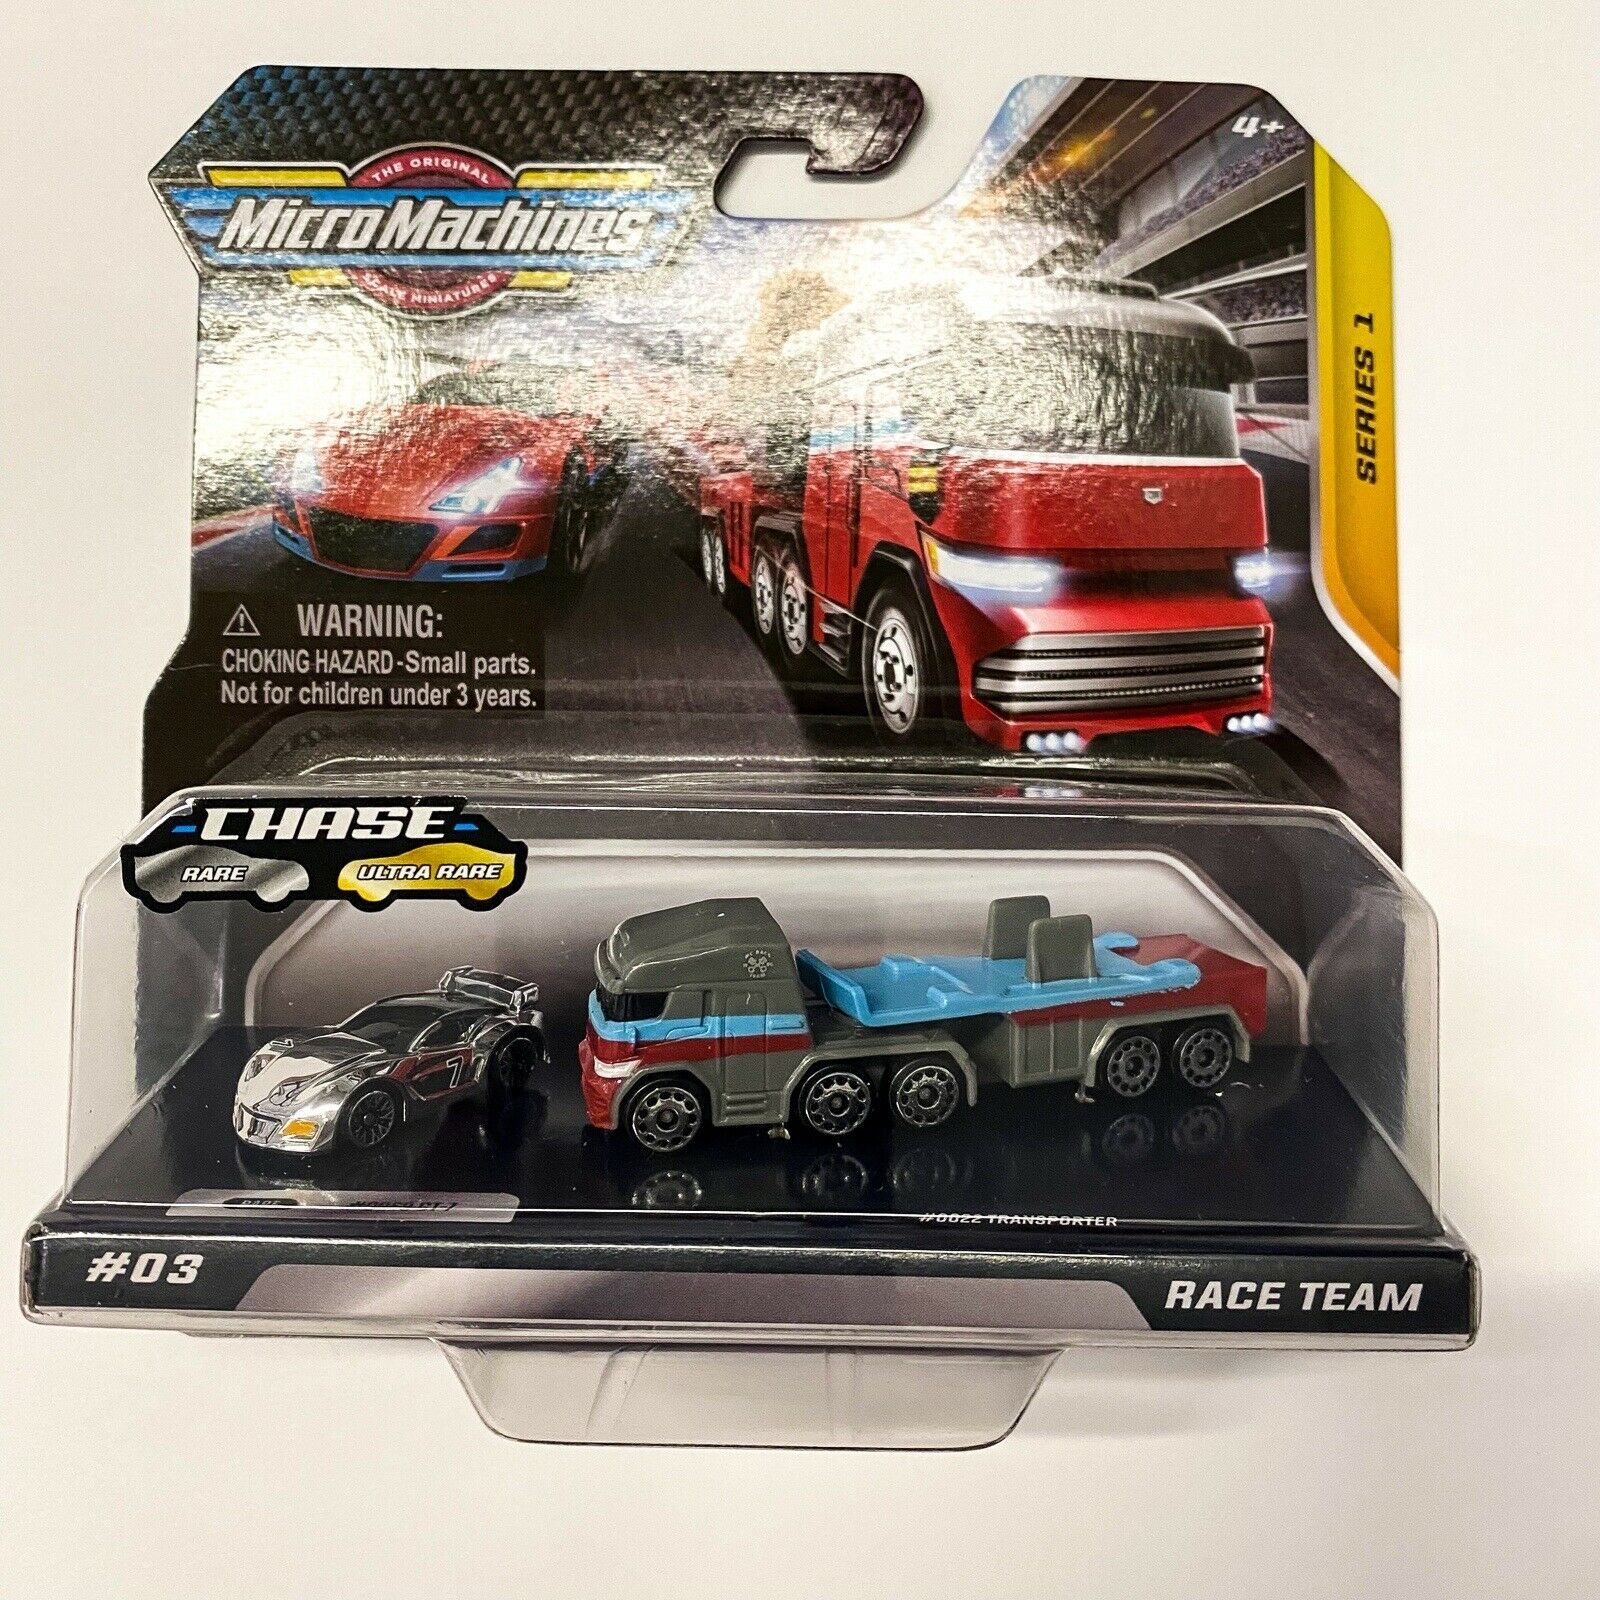 New Micro Machines Series 1 Race Team Set Chrome Rare Chase #03 GT-7 Transporter - $15.15